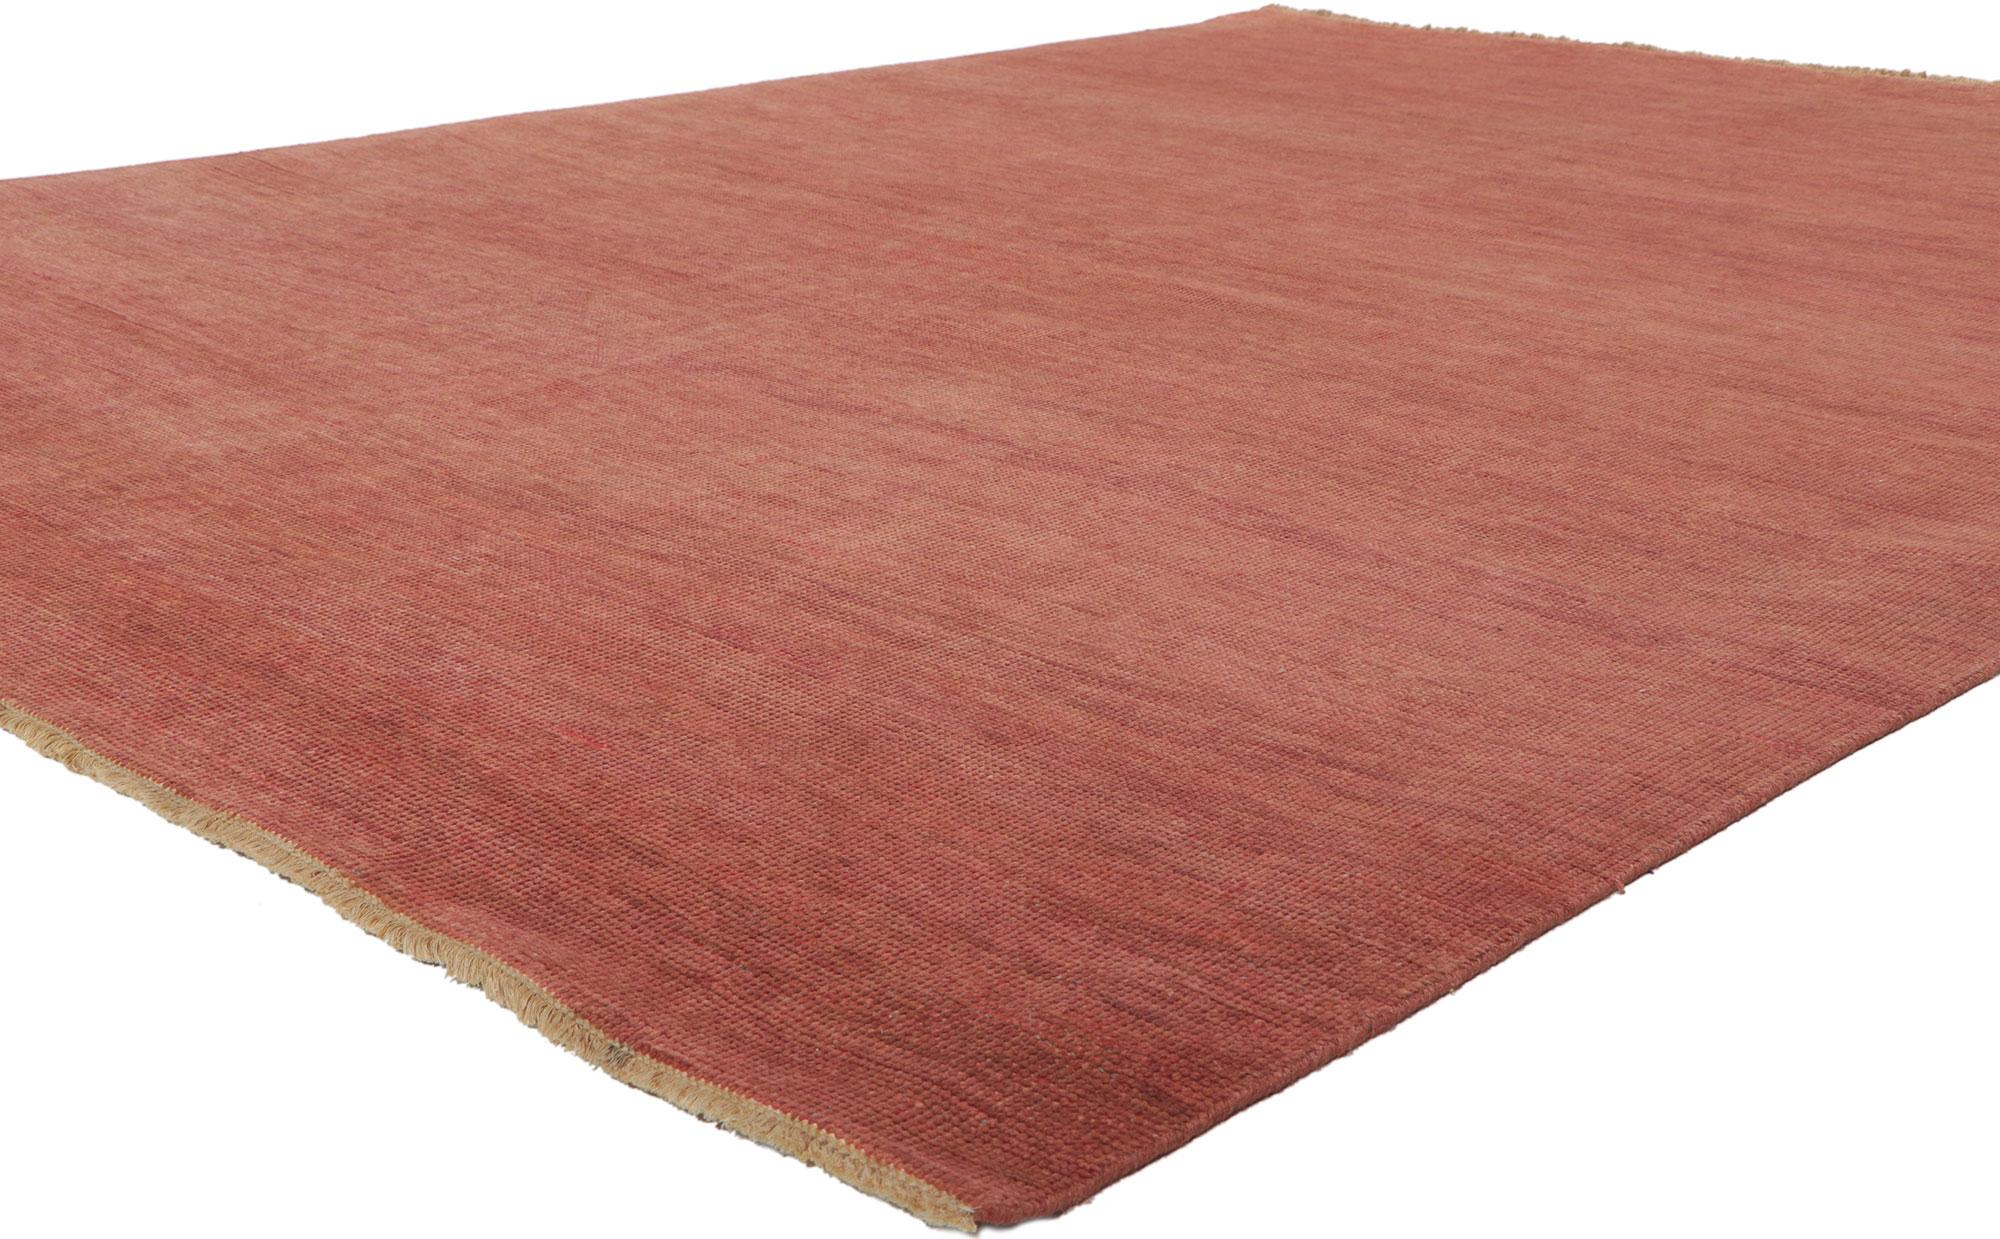 30861 New Contemporary Modern area, 07.08 x 10.01. Effortless, elegant, and casual meets the eye in this contemporary modern area rug. It features rustic red hues and softly gradated striations running selvage to selvage blending seamlessly from one